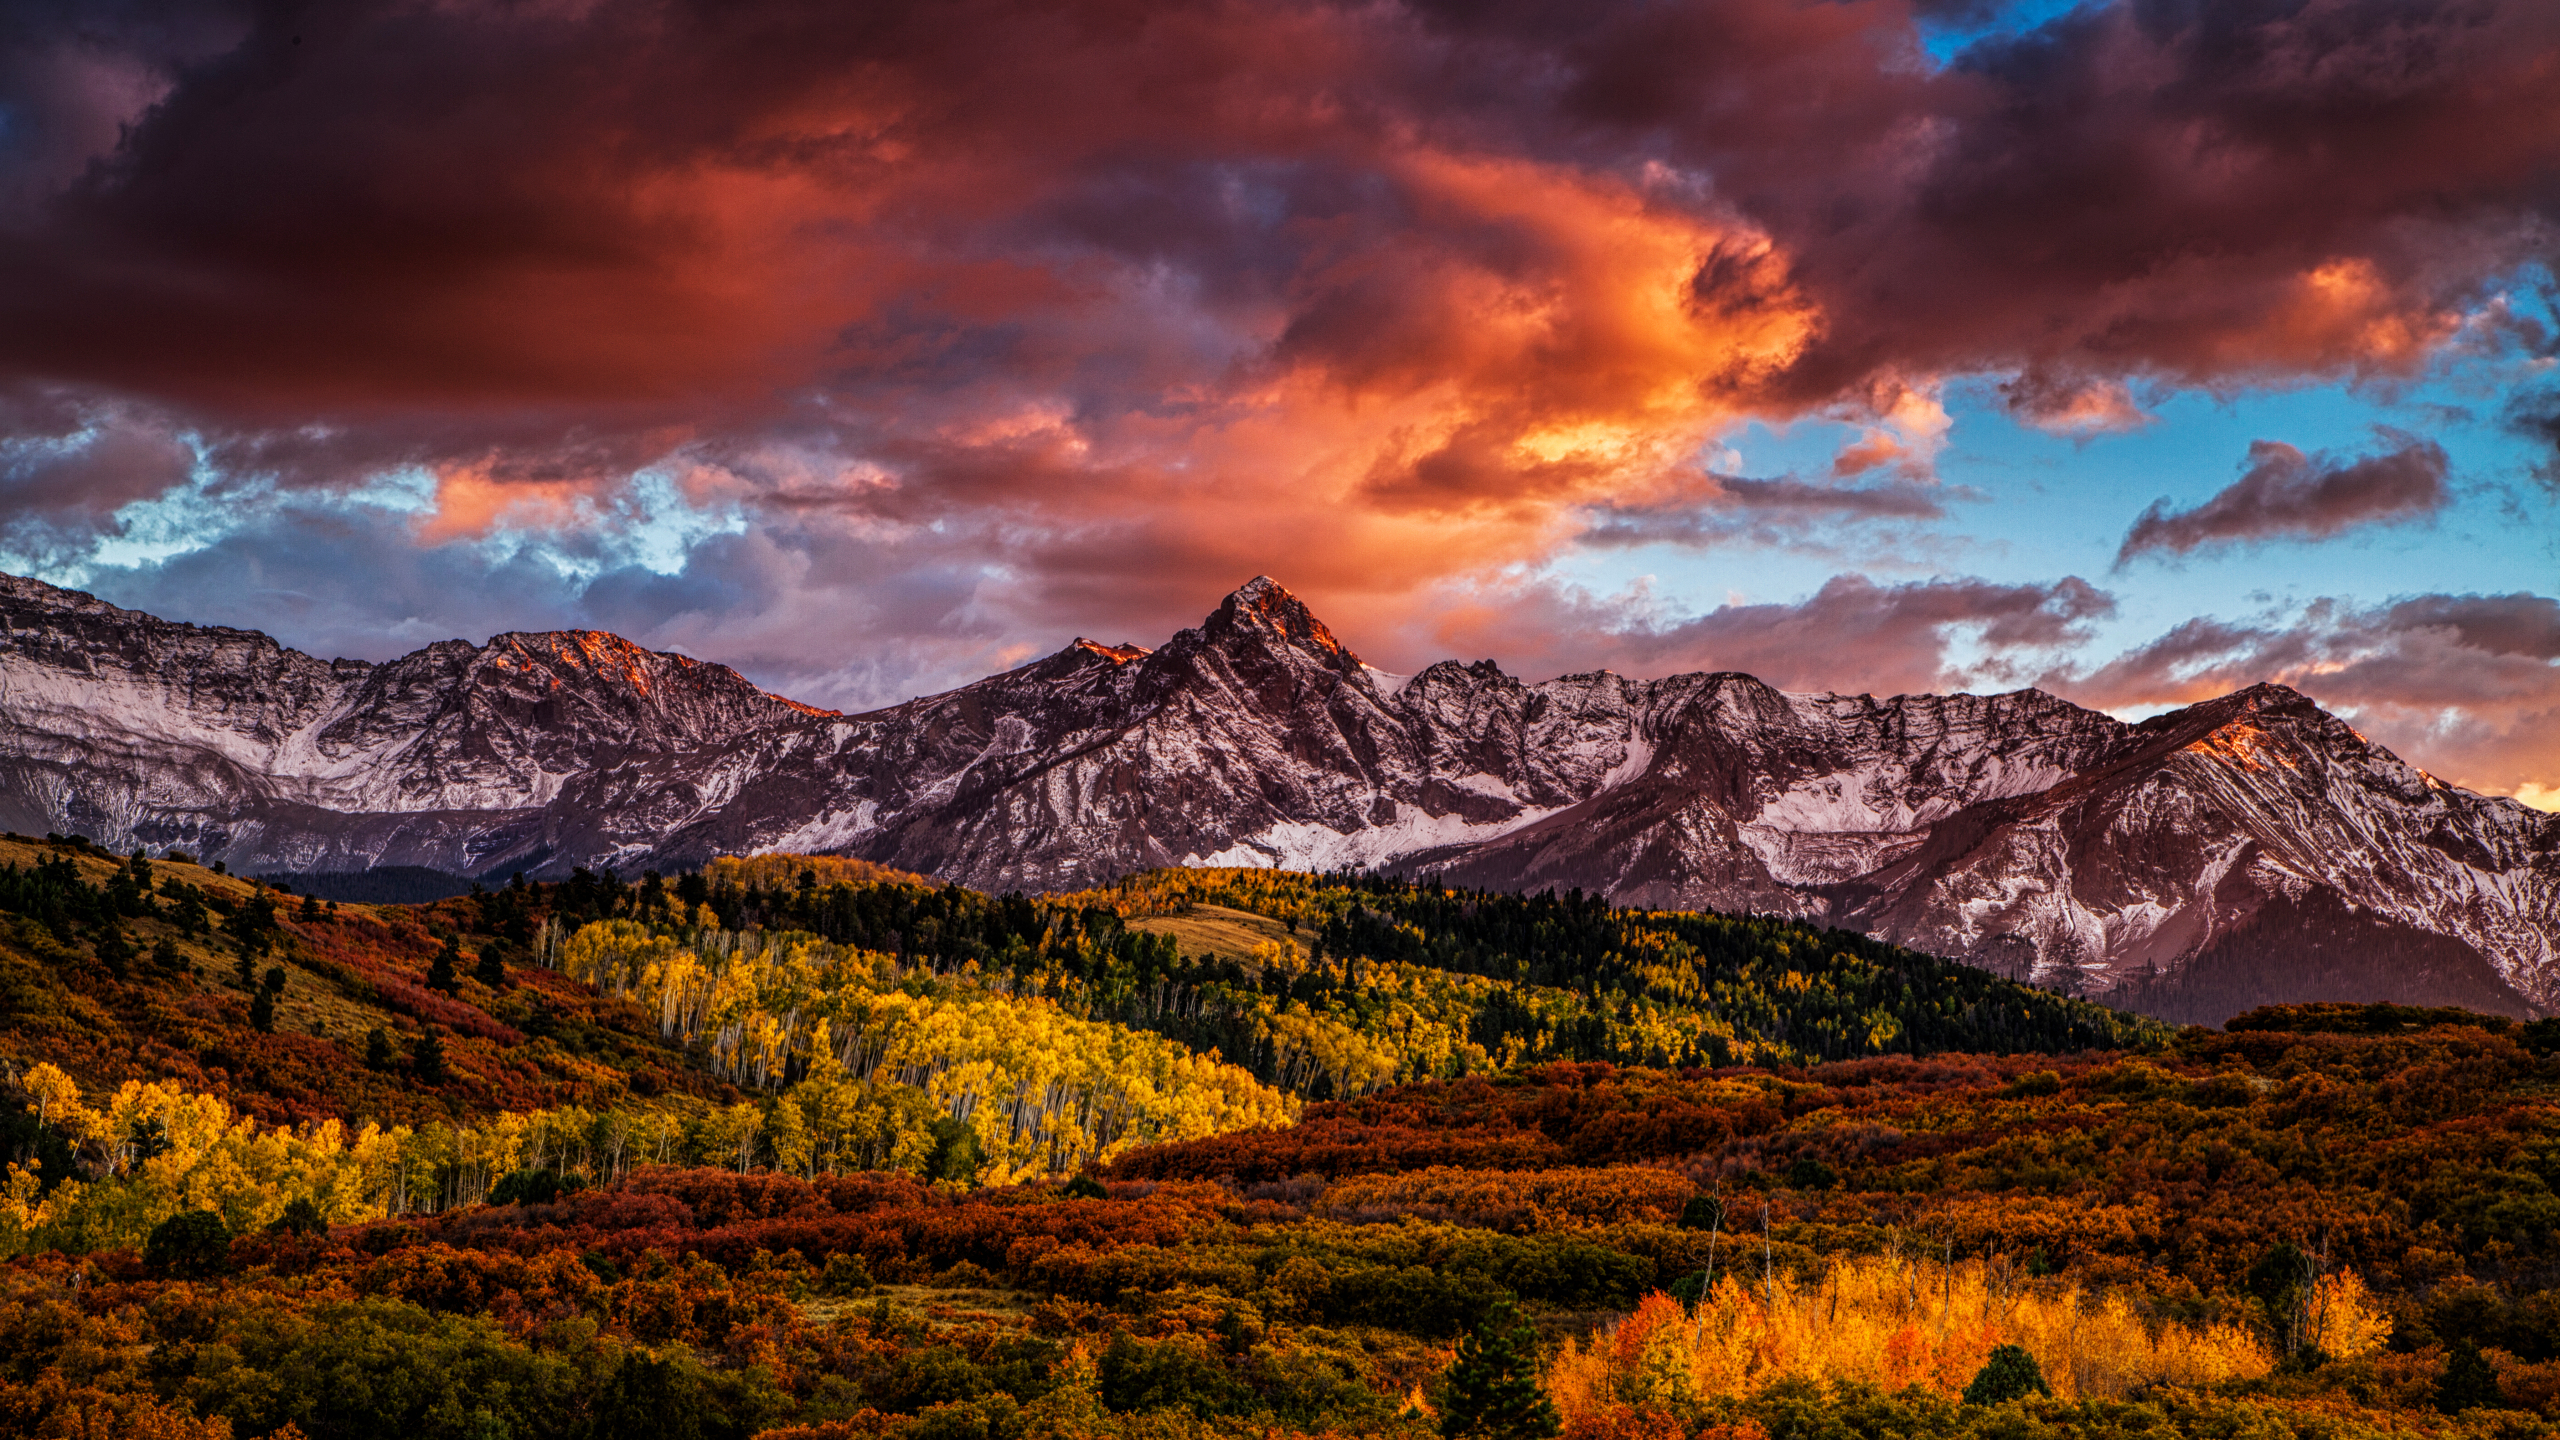 Celebrate the first day of Autumn: Some of the most magnificent Fall scenes in Colorado